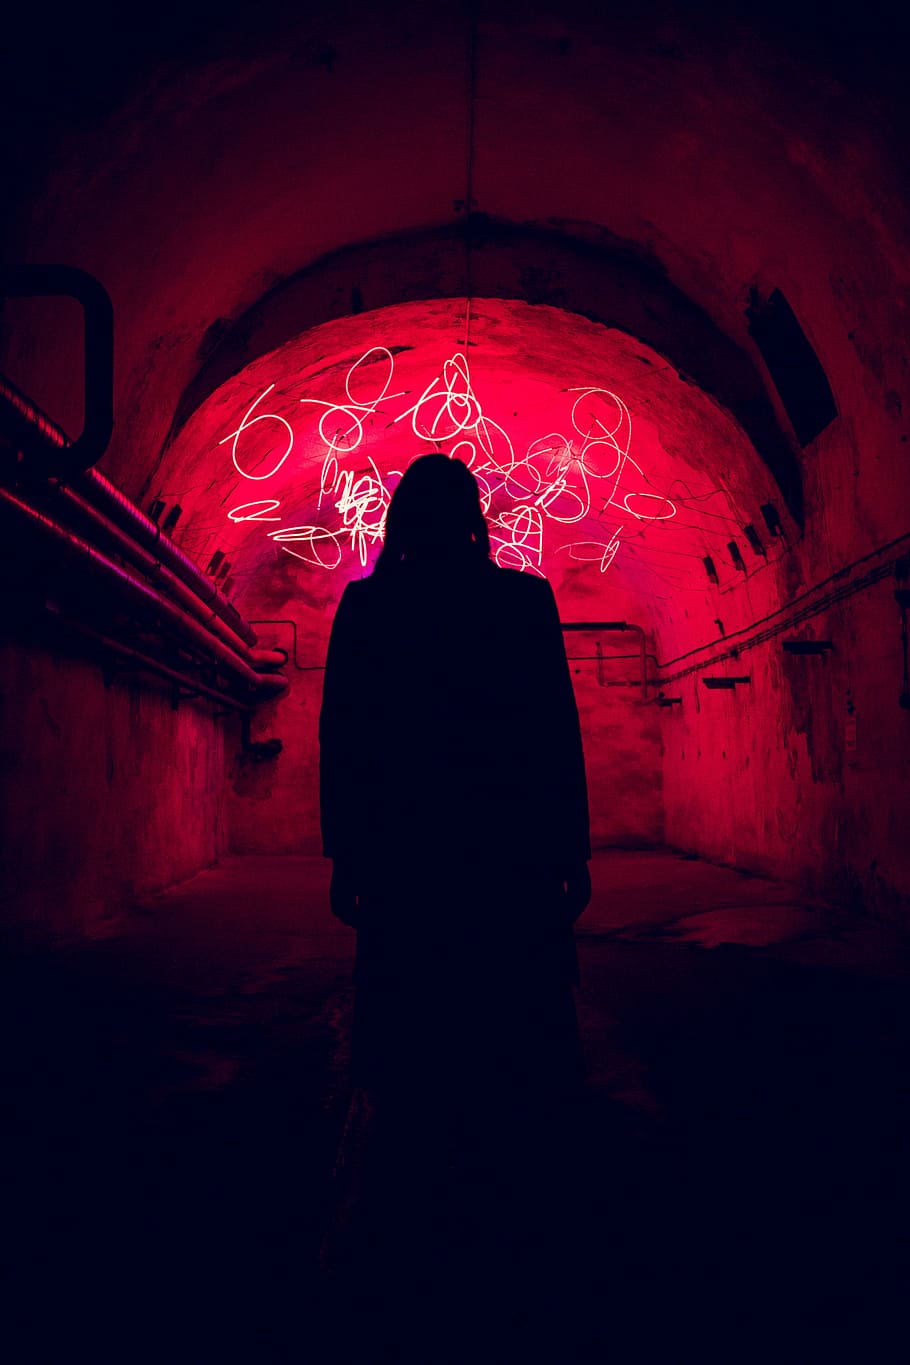 In front of chaos, silhouette of person standing inside tunnel